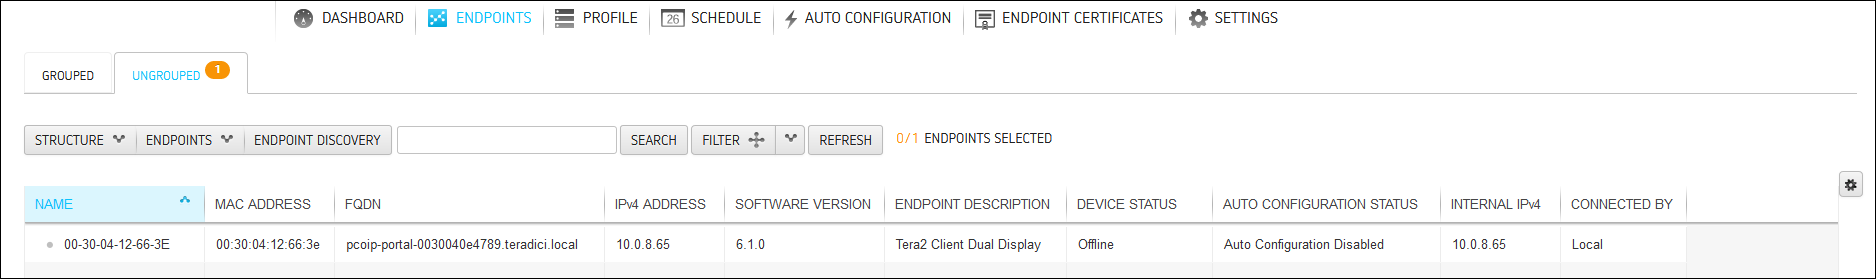 Management Screen Showing Discovered Endpoints